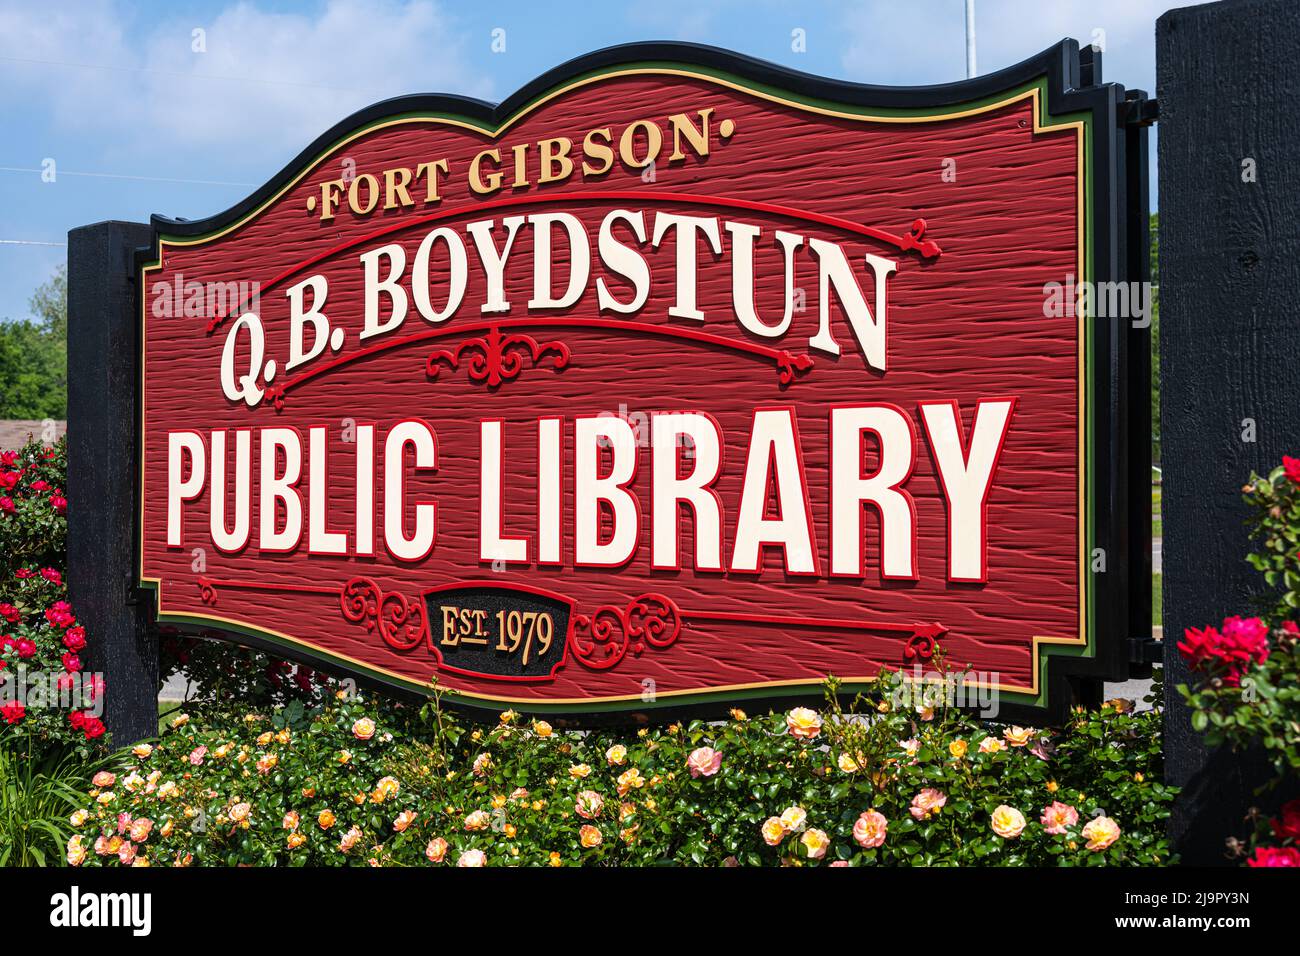 Entrance signage for Fort Gibson, Oklahoma's Q.B. Boydstun Public Library, a local community library within the Eastern Oklahoma Library System. (USA) Stock Photo